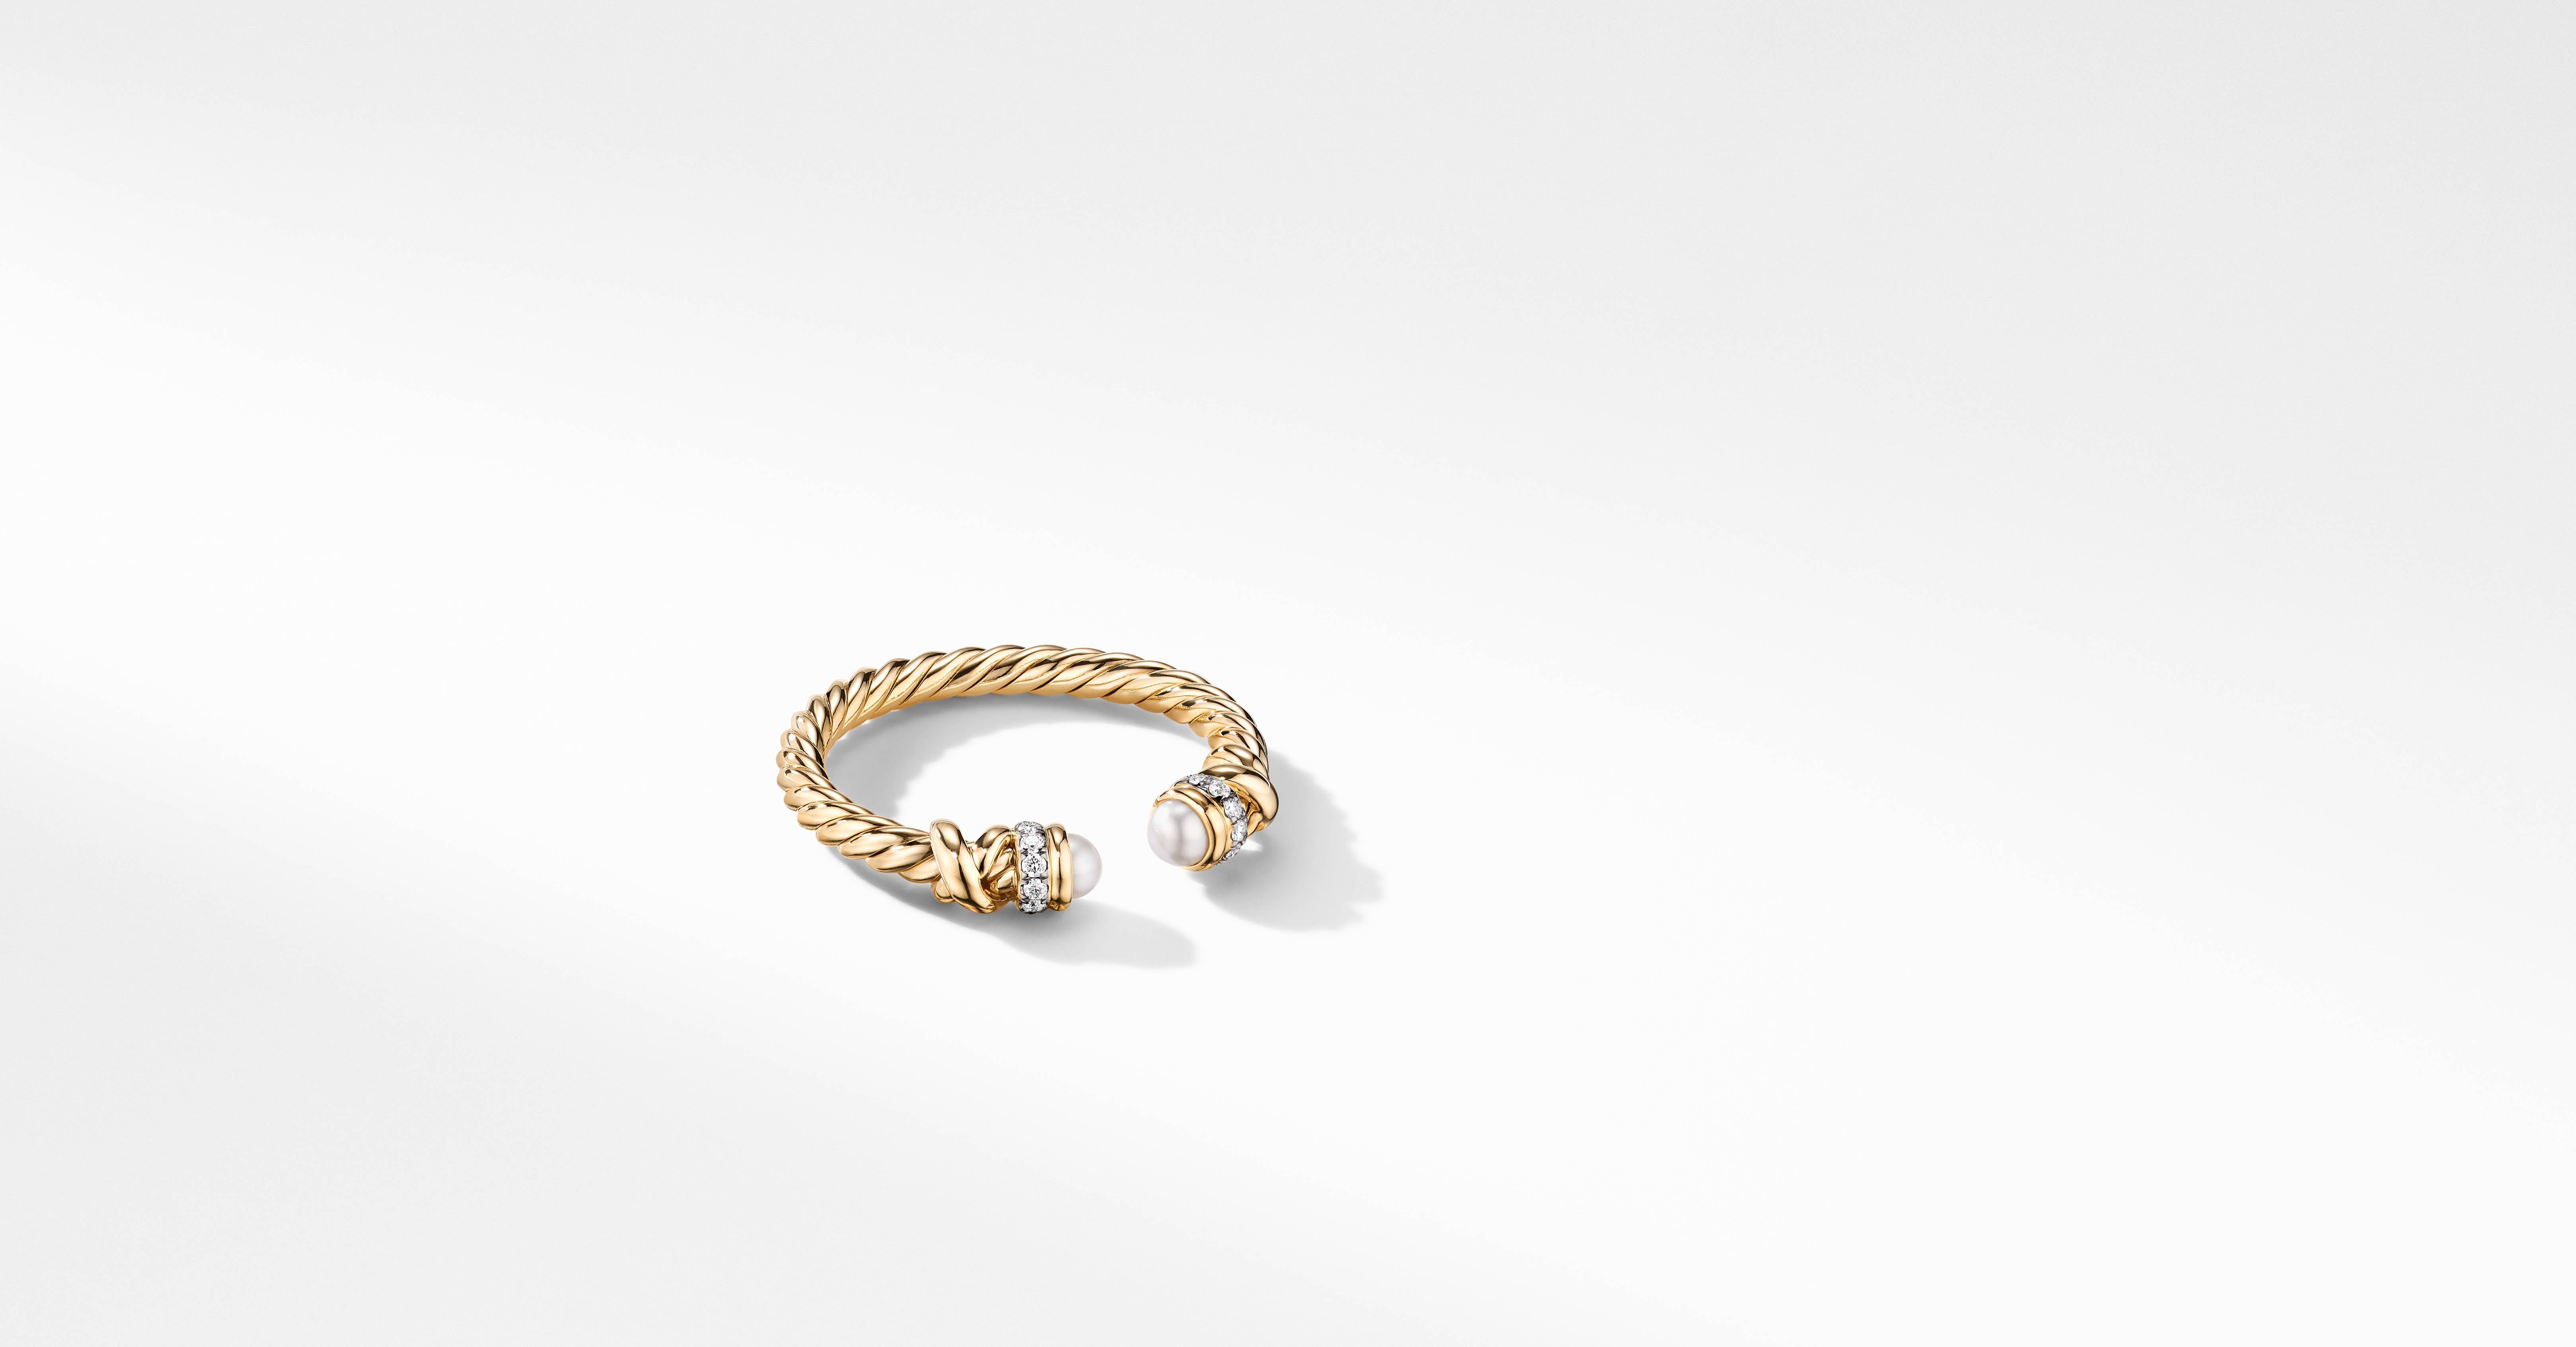 Petite Helena Ring in 18K Yellow Gold with Pearls and Pavé Diamonds David  Yurman